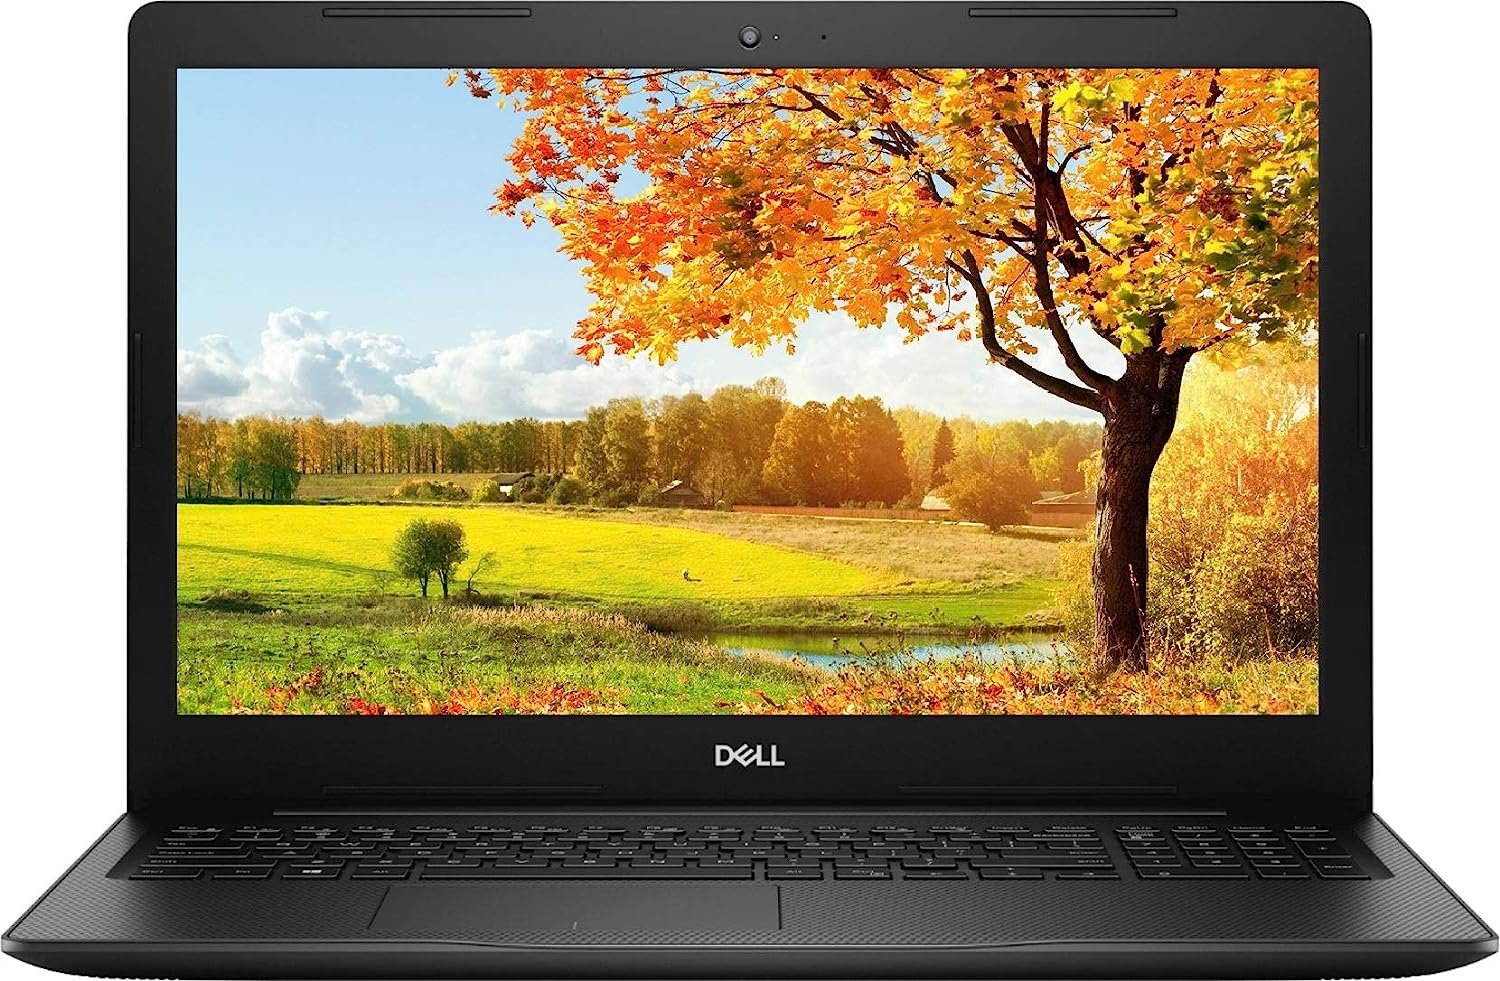 Dell Inspiron 15.6 inch HD Laptop